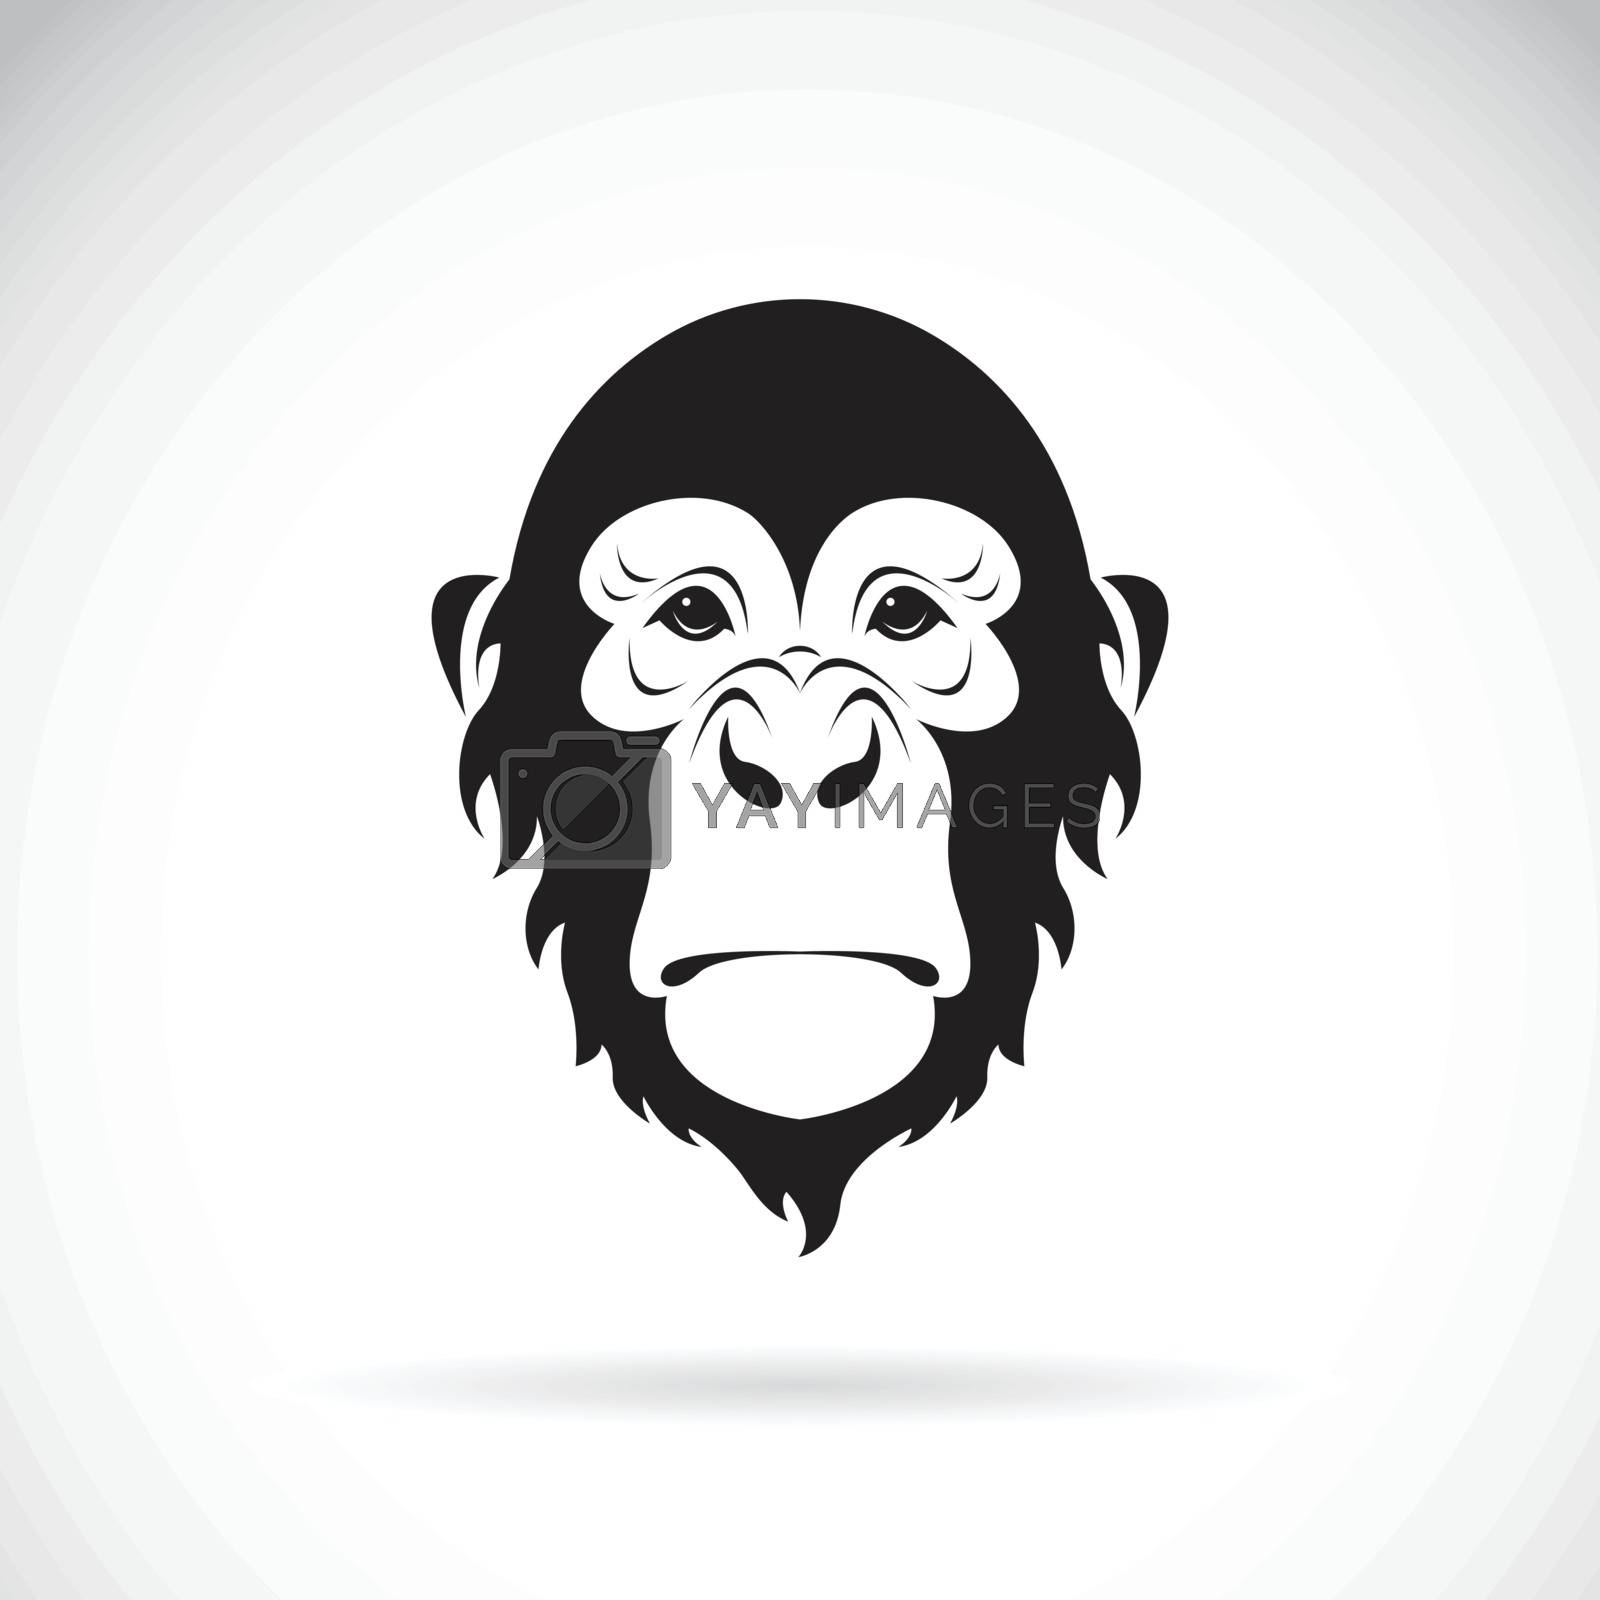 Royalty free image of Vector of a monkey face design on white background. Wild Animals by yod67